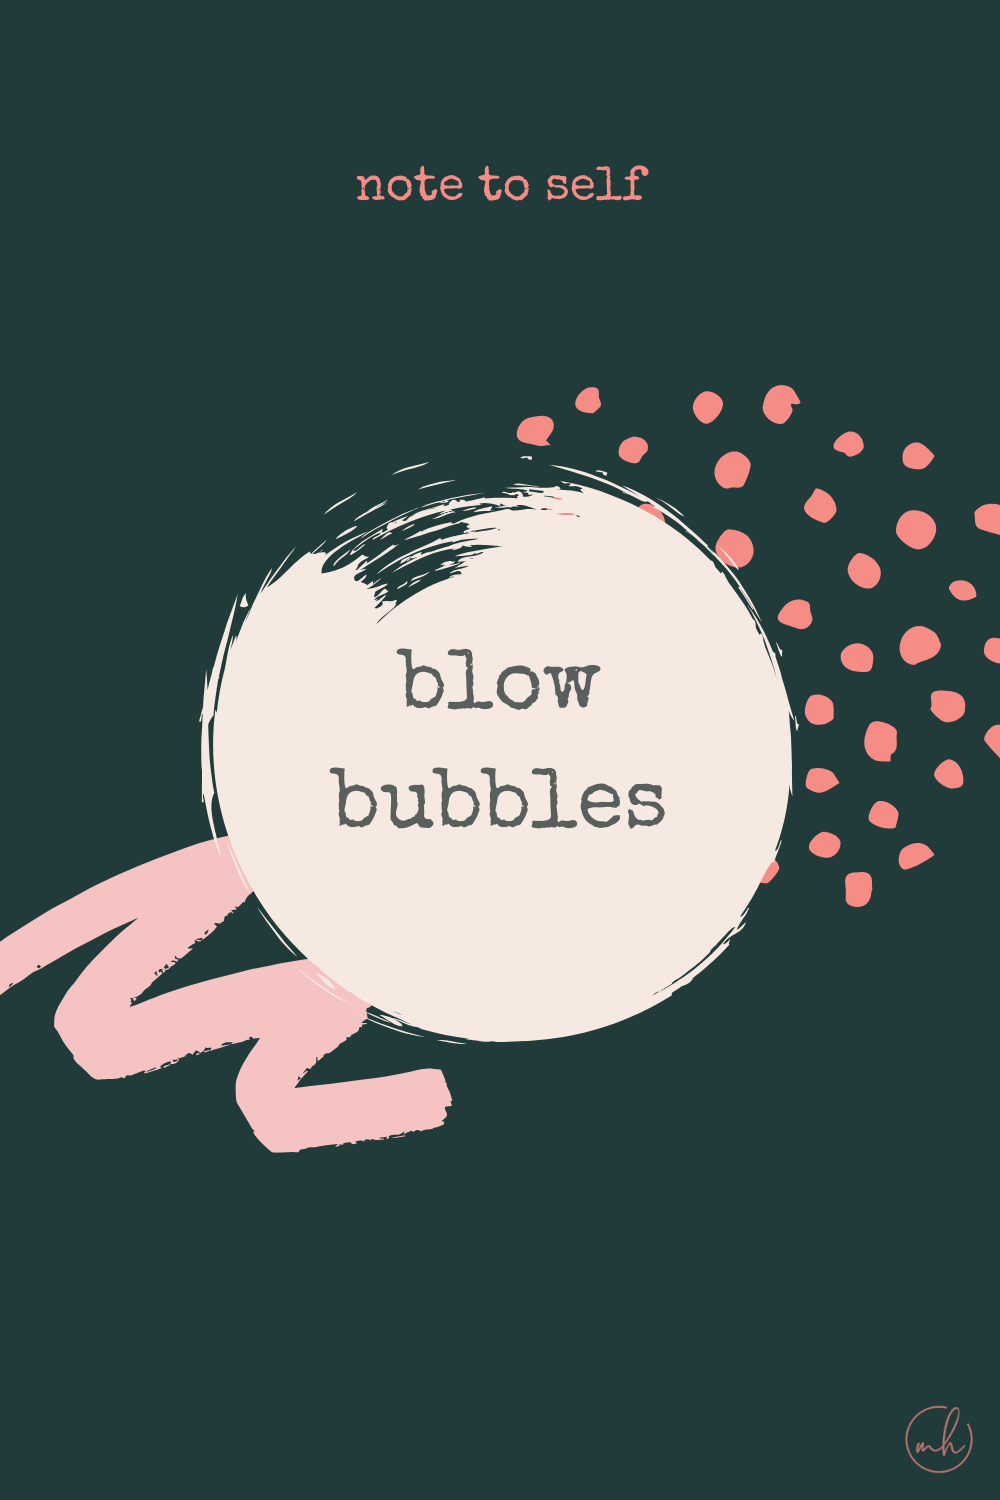 Blow bubbles - Note to self quotes | myhoogah